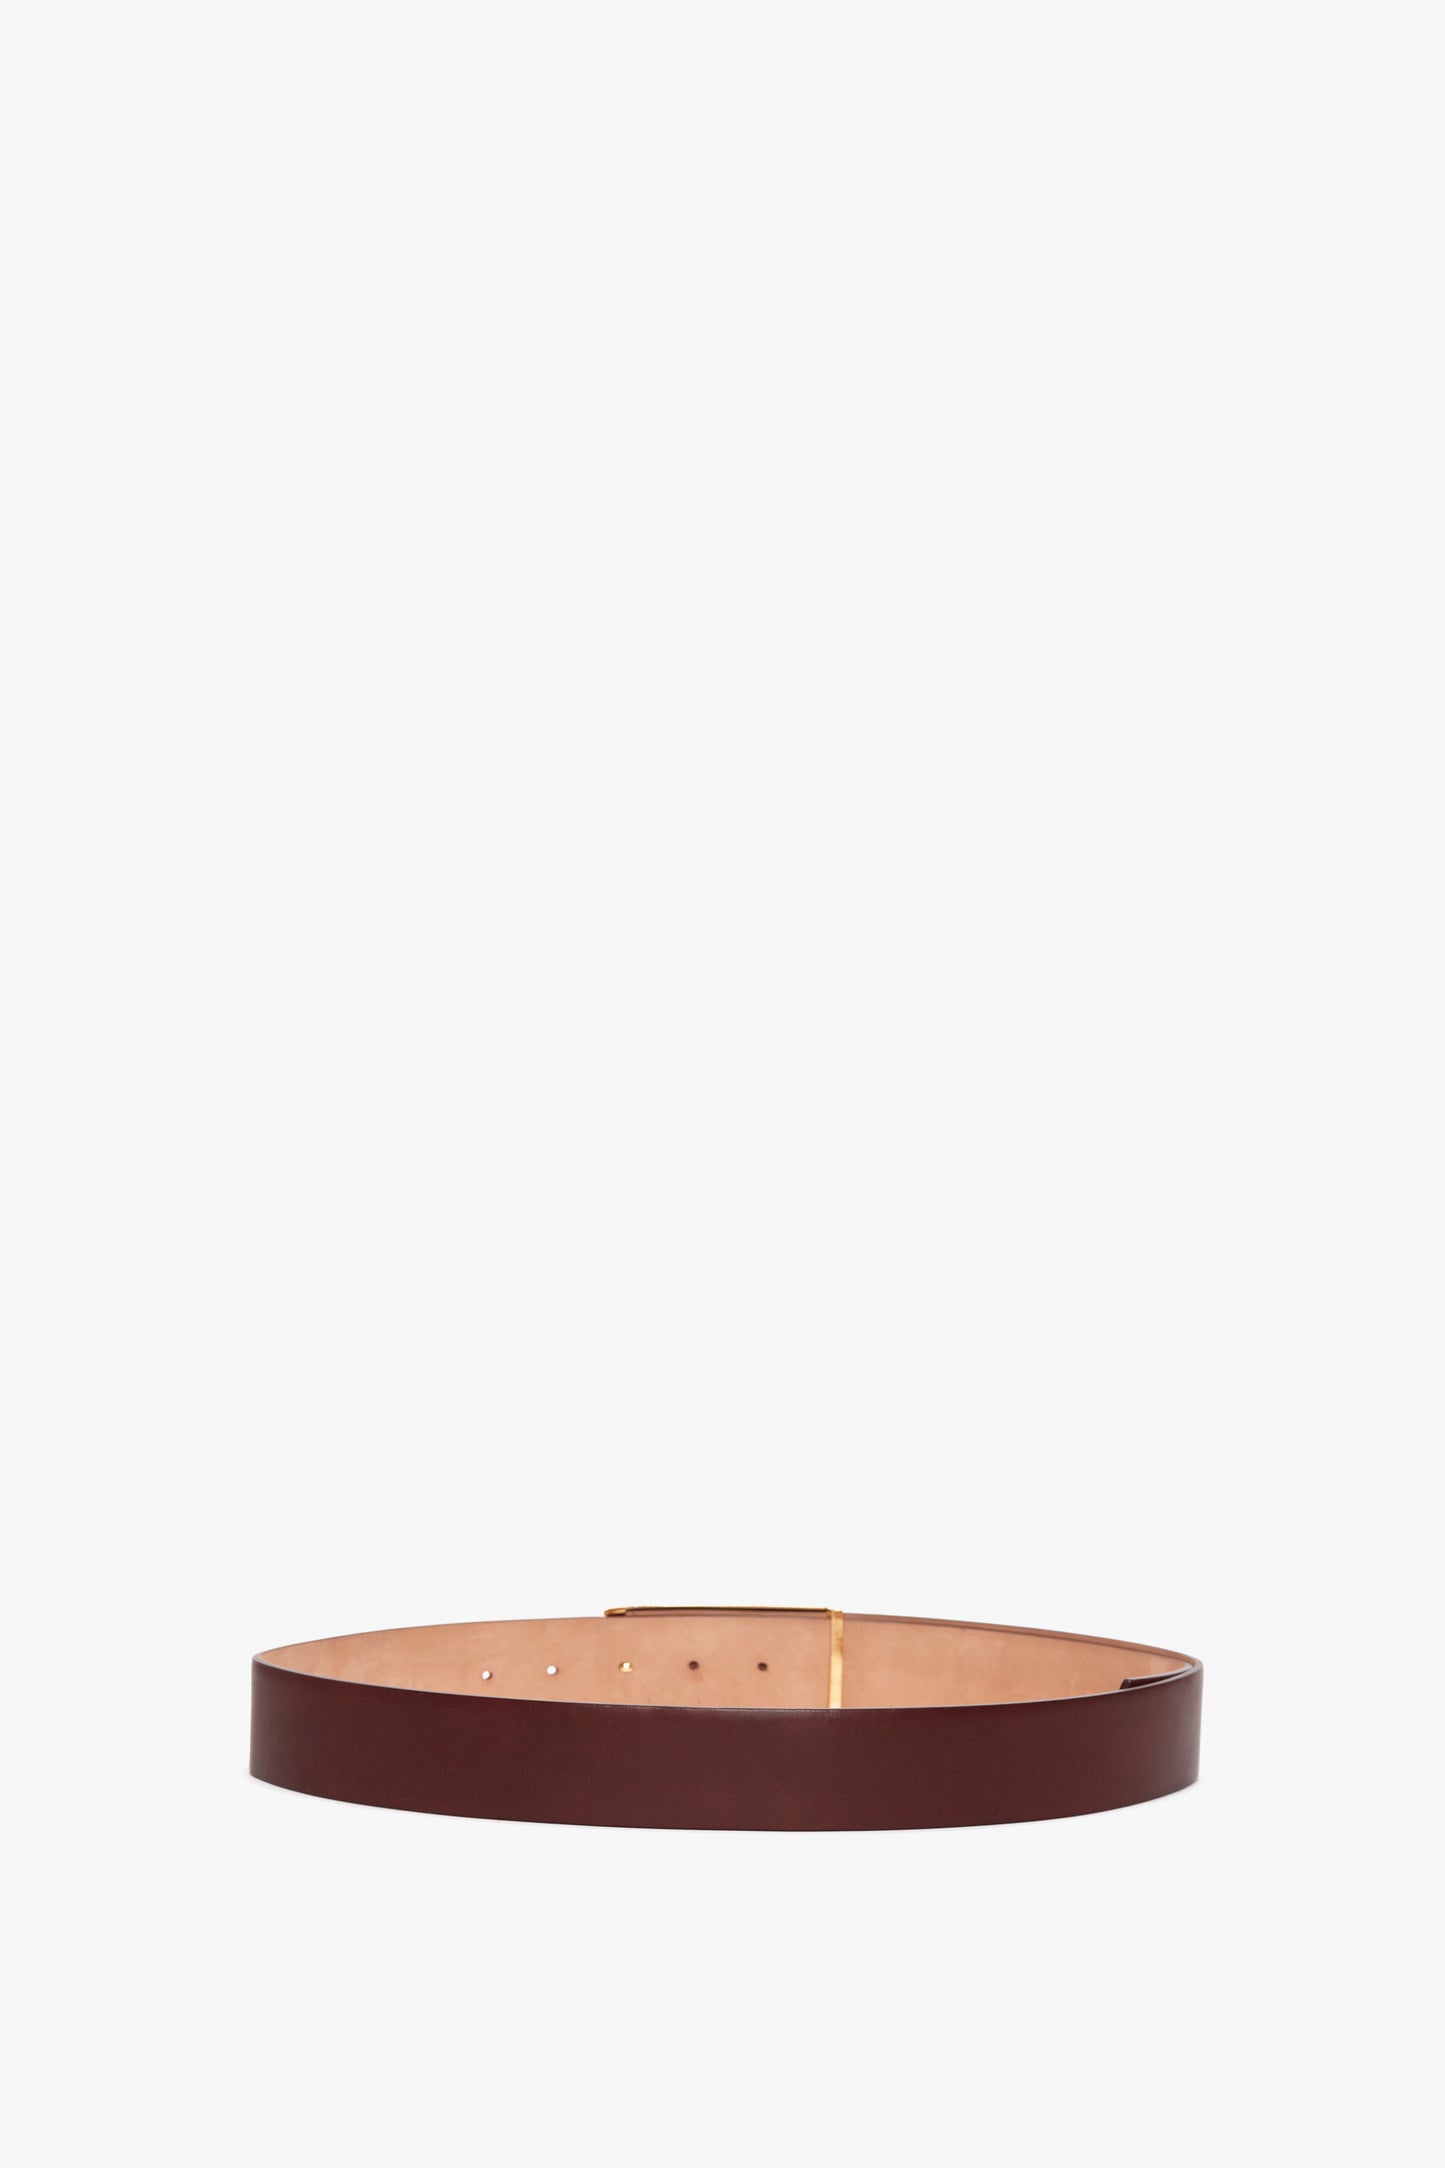 A contemporary Jumbo Frame Belt In Burgundy Leather from Victoria Beckham, crafted from premium calf leather, featuring a smooth, plain design and several holes for adjustment.